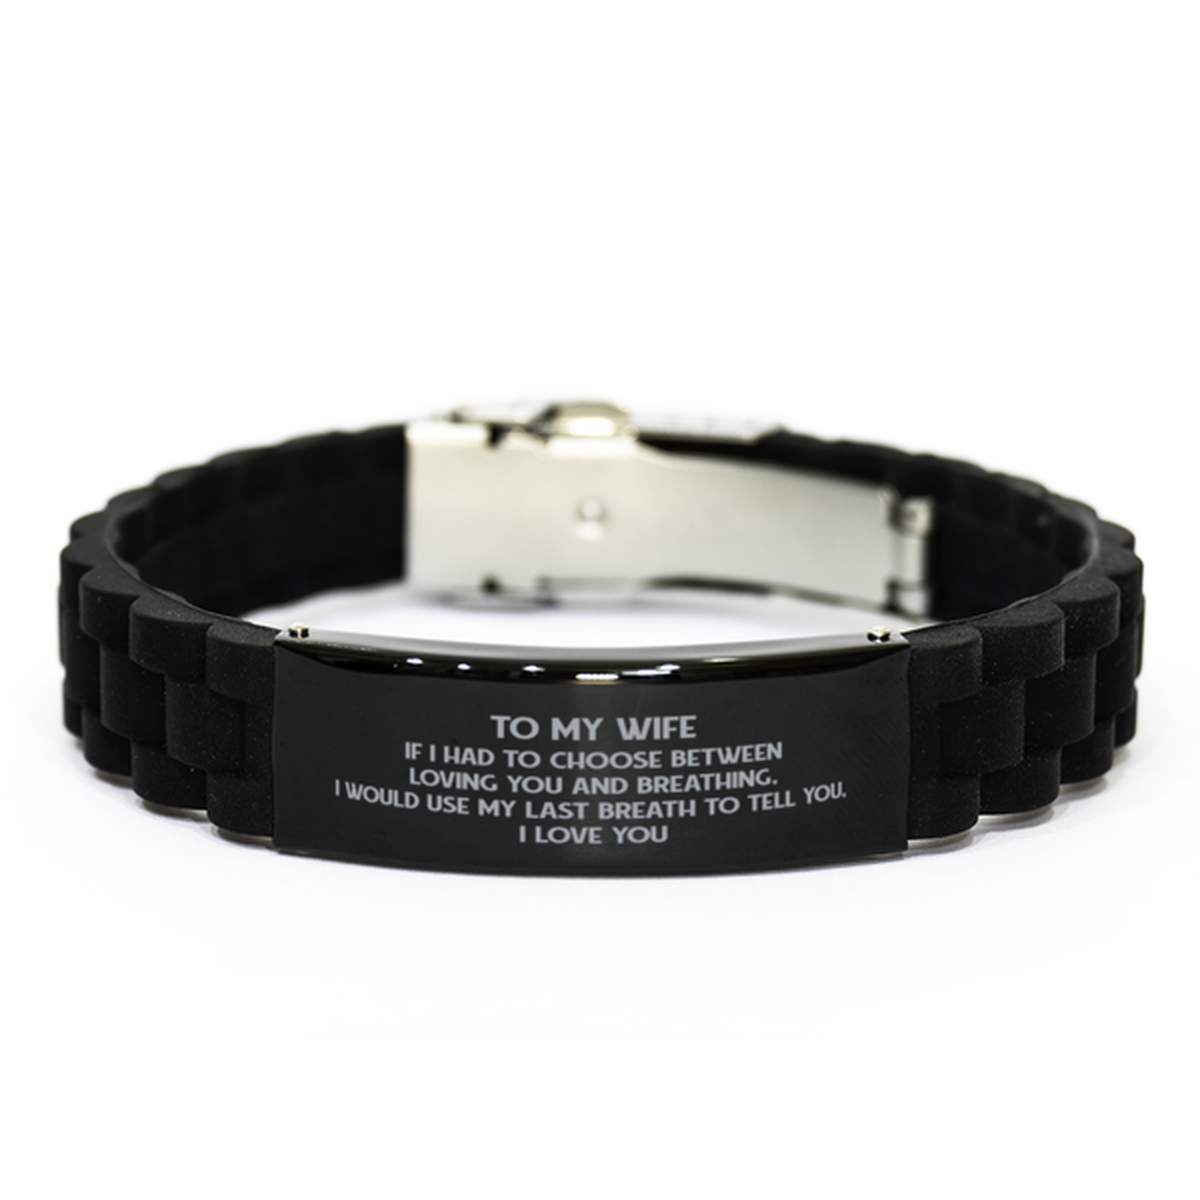 To My Wife Black Bracelet, Loving You, Birthday Gifts For Wife From Husband, Valentines Gifts For Women